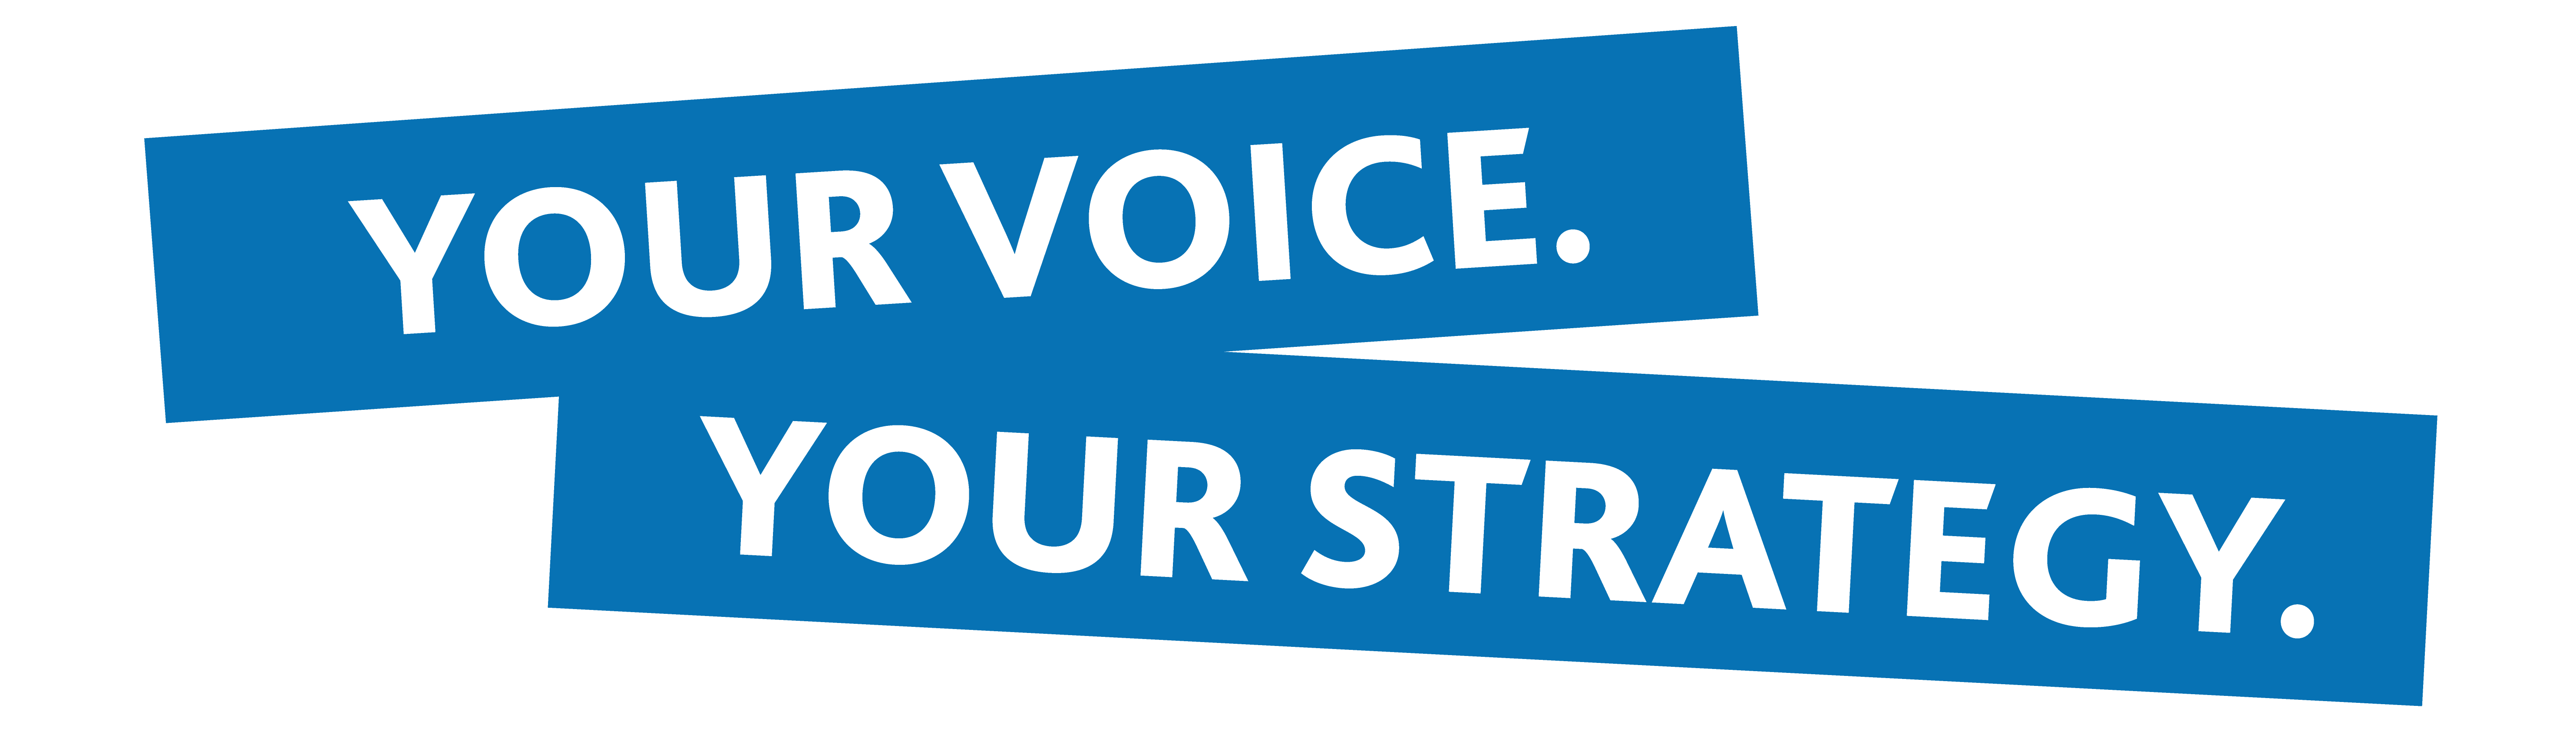 Your Voice. Your Strategy.